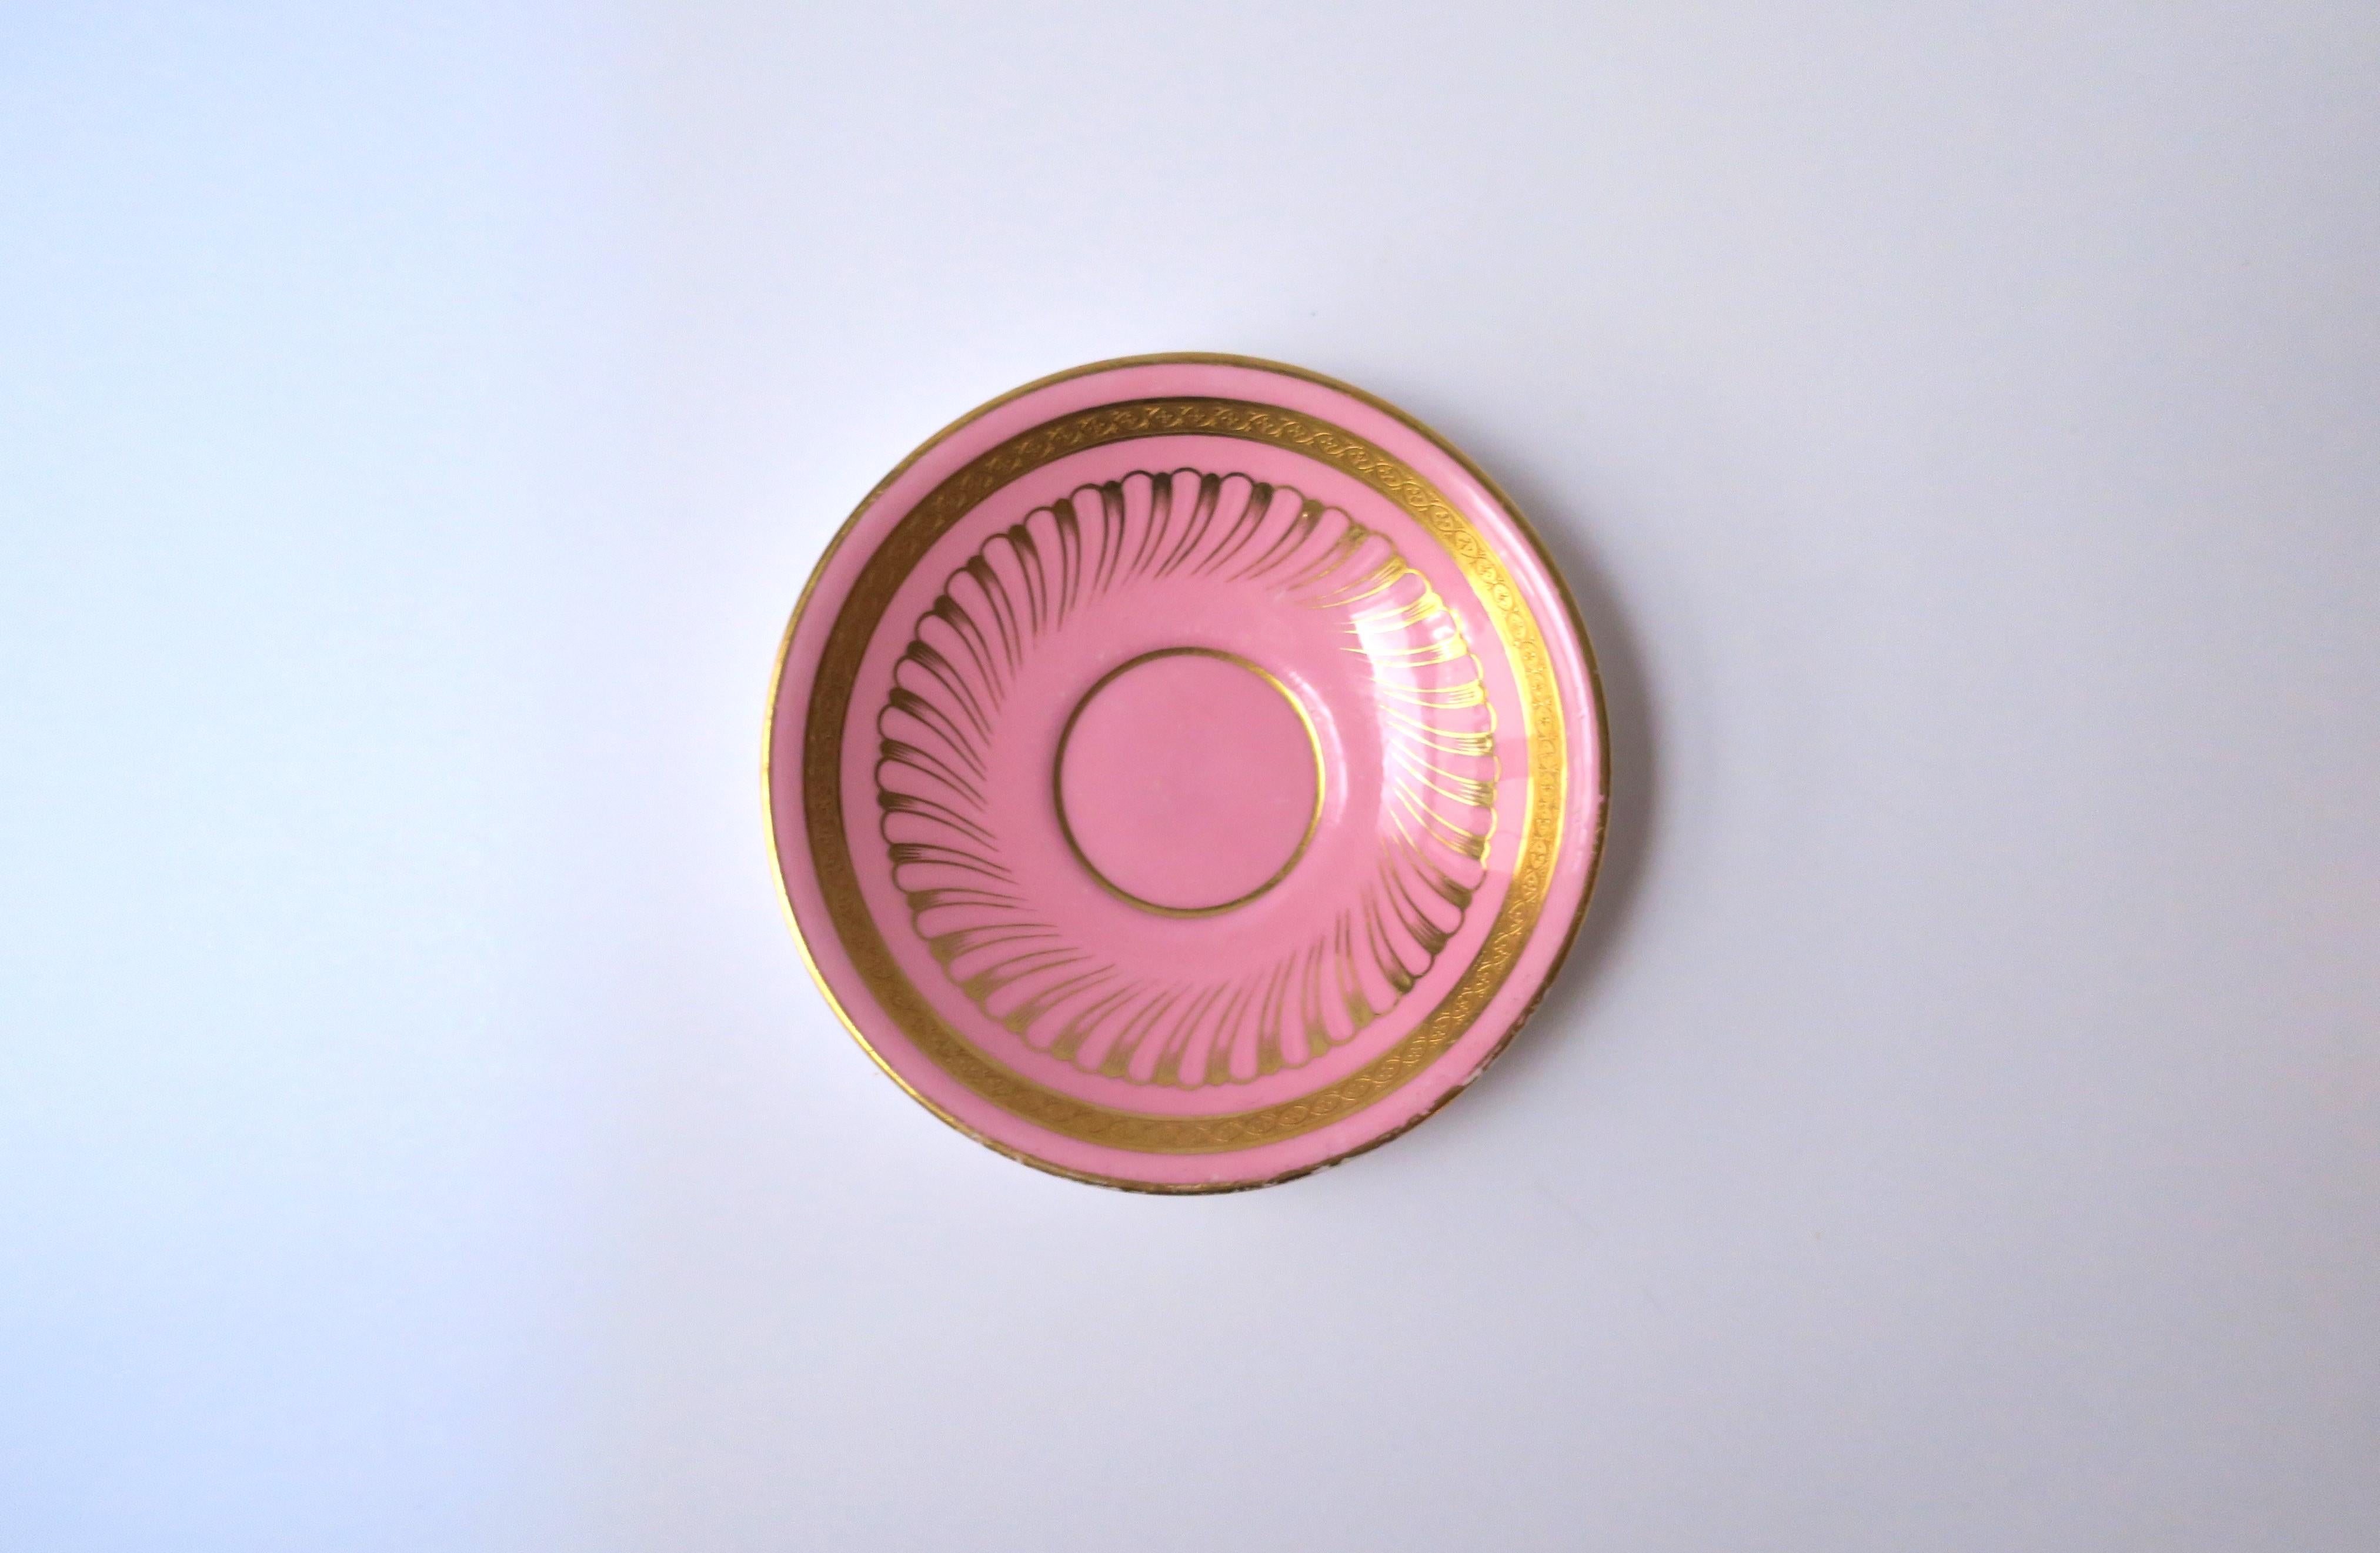 English Minton Pink & Gold Porcelain Coffee Espresso Cup & Saucer, 19th century For Sale 4